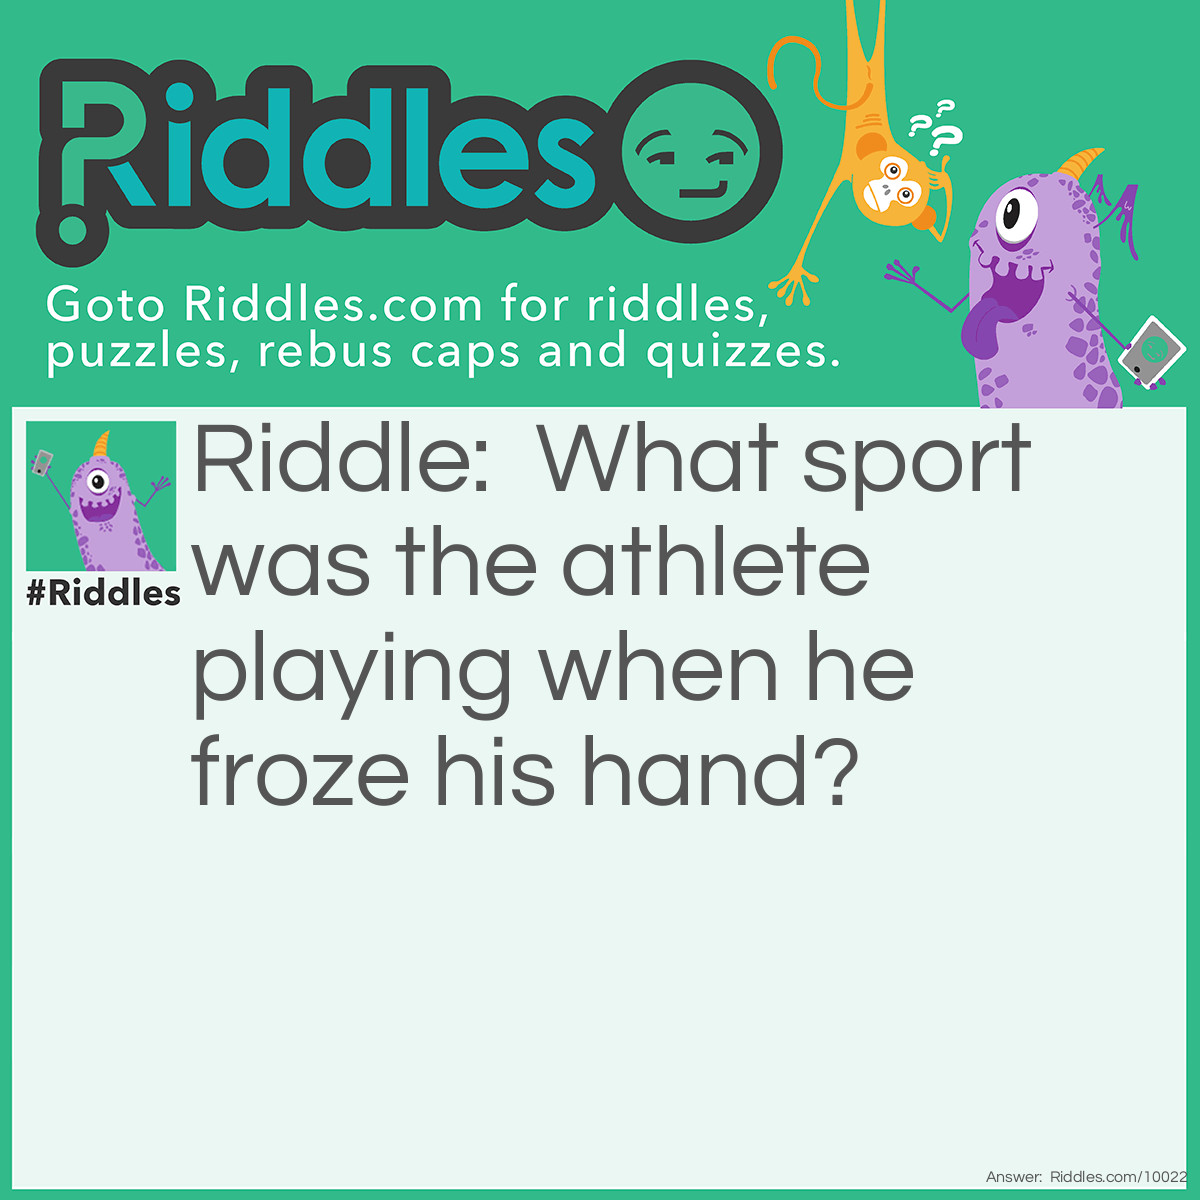 Riddle: What sport was the athlete playing when he froze his hand? Answer: Badminton.